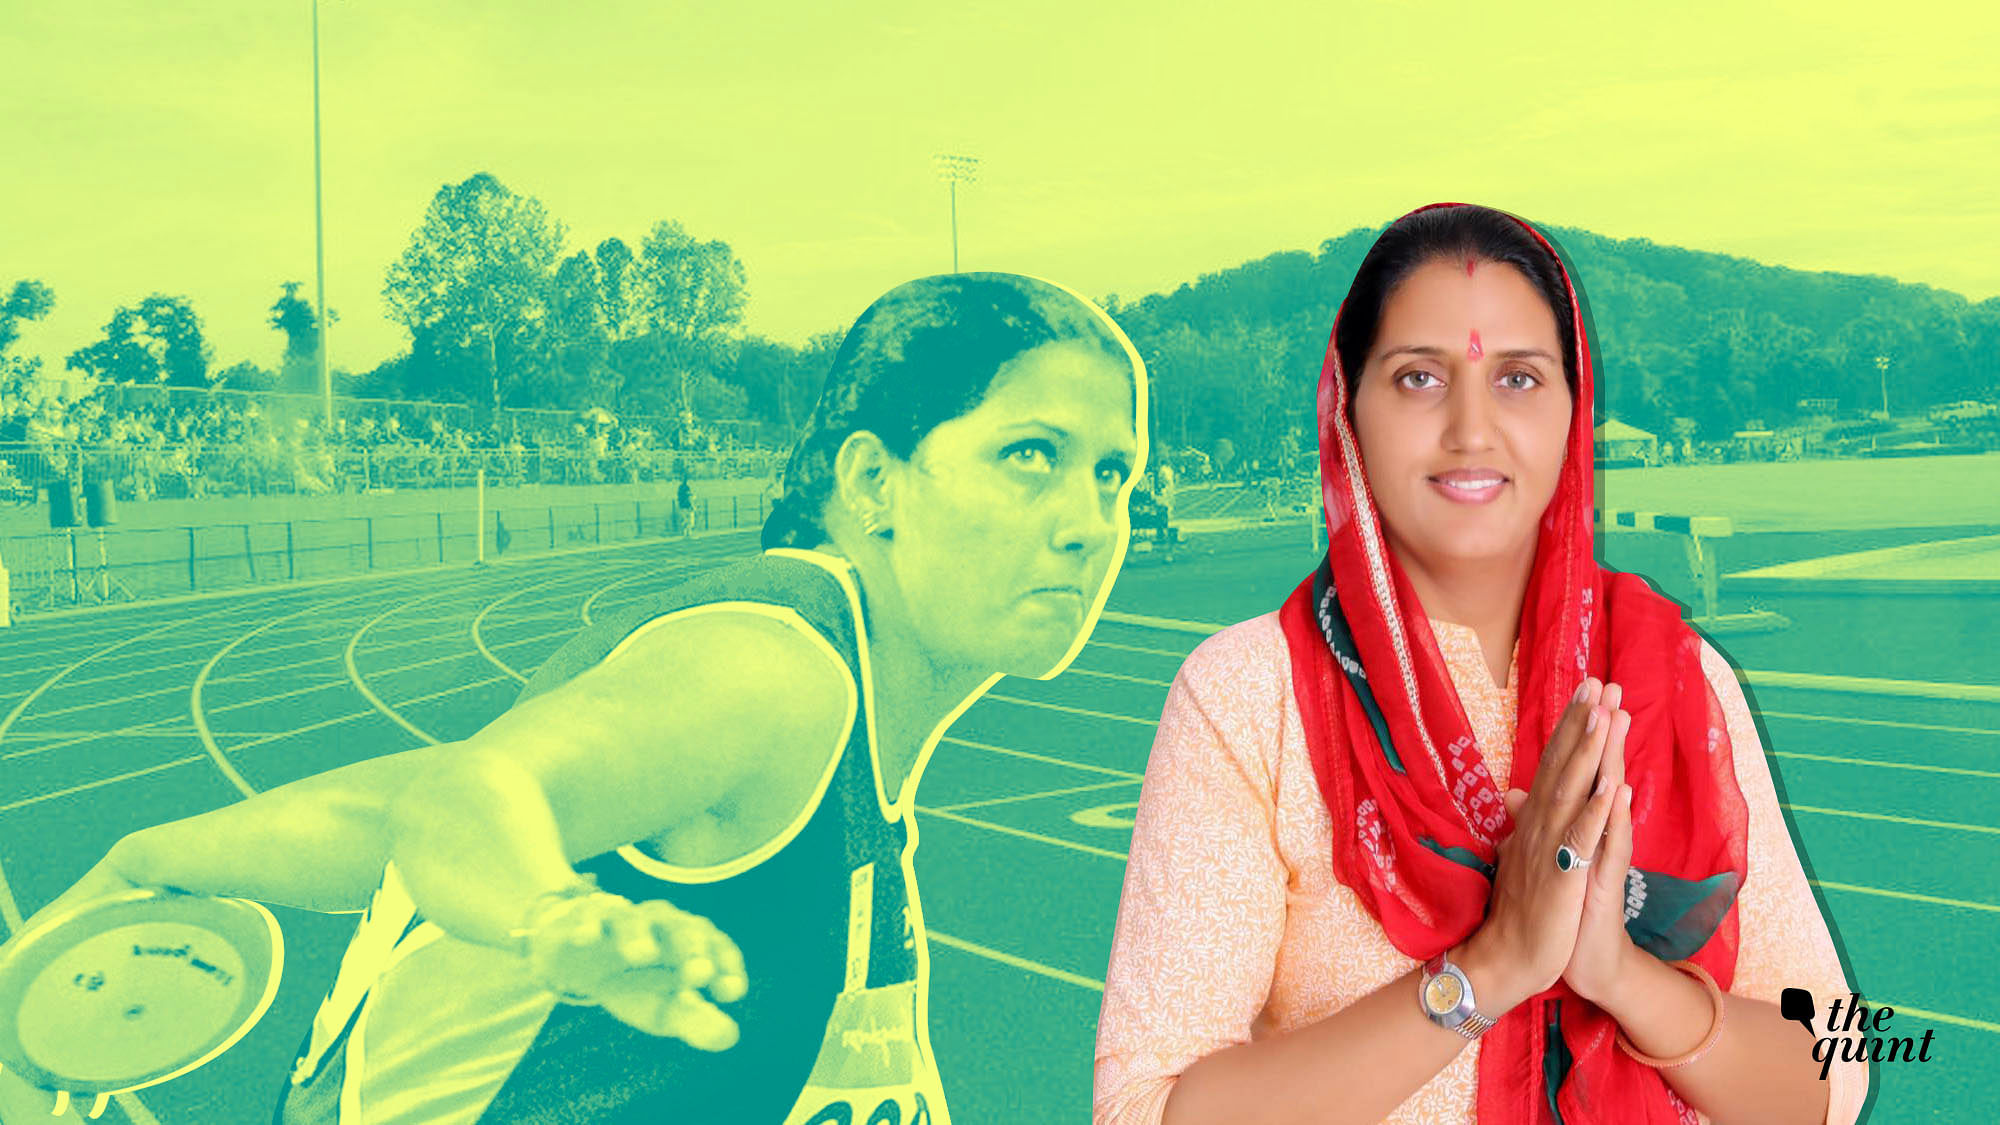 Krishna Poonia, who is a discus thrower, won the gold medal in the 2010 commonwealth games and is a Padma Shree awardee.